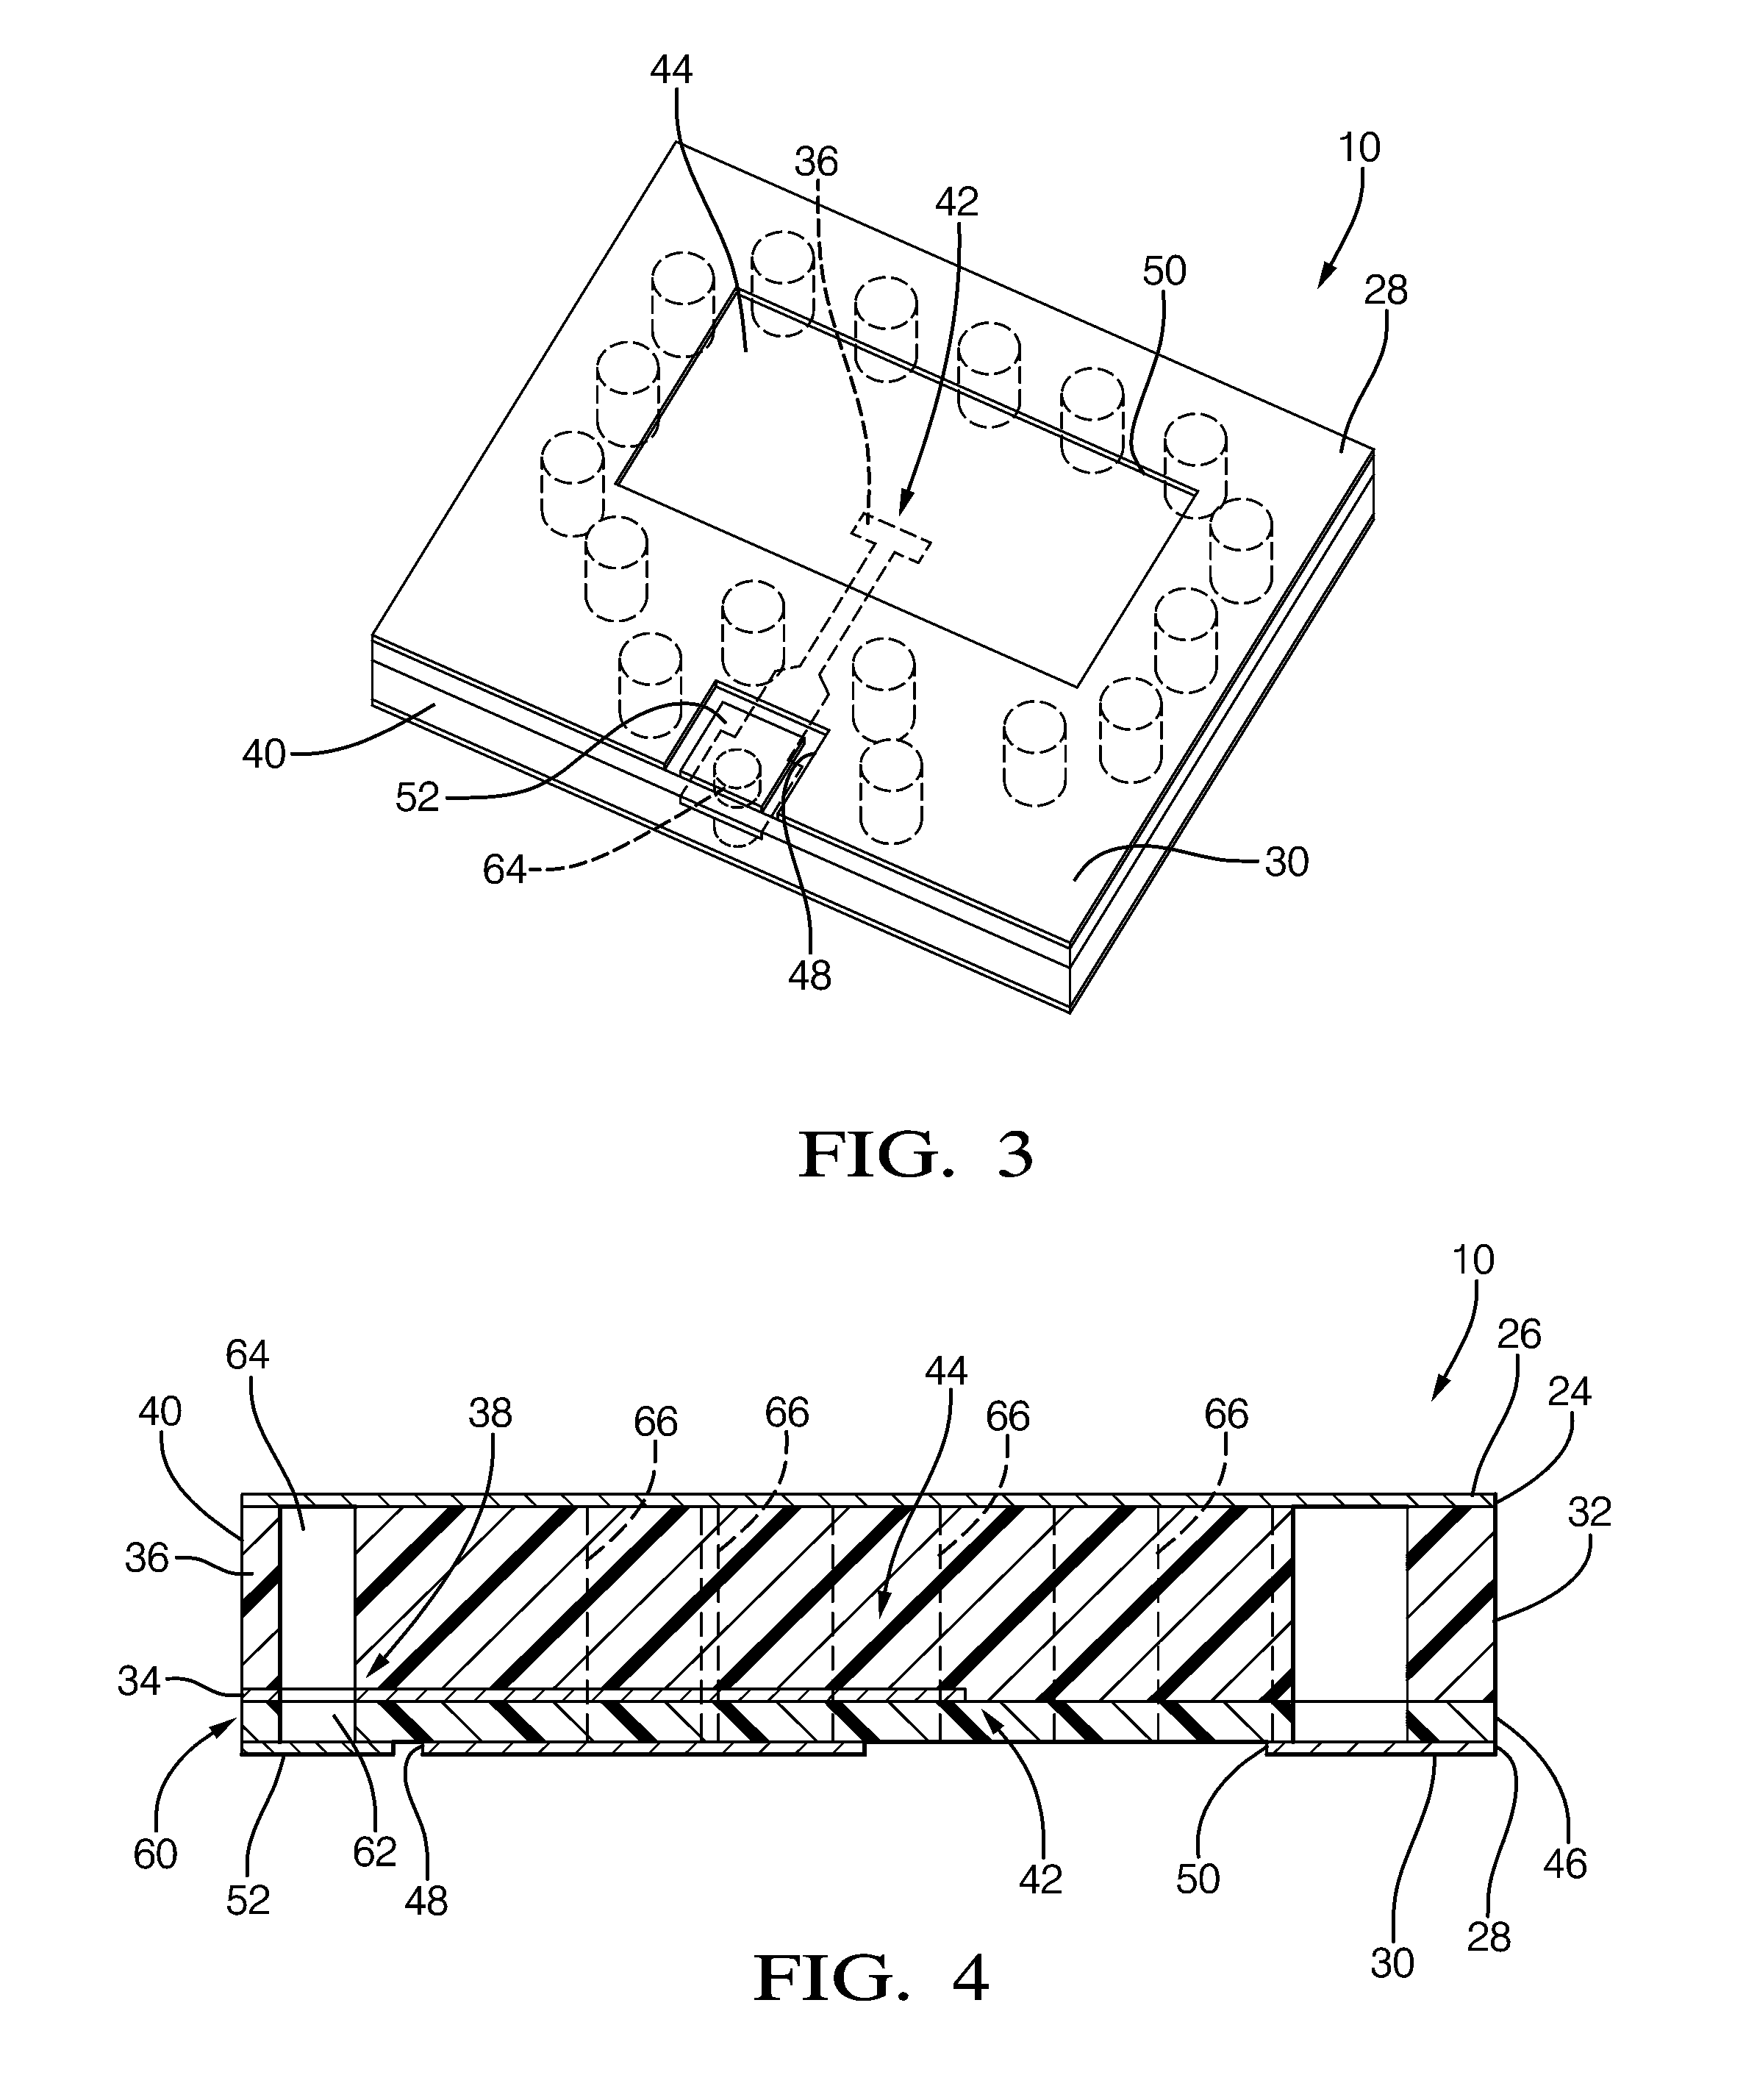 Surface mountable microwave signal transition block for microstrip to perpendicular waveguide transition